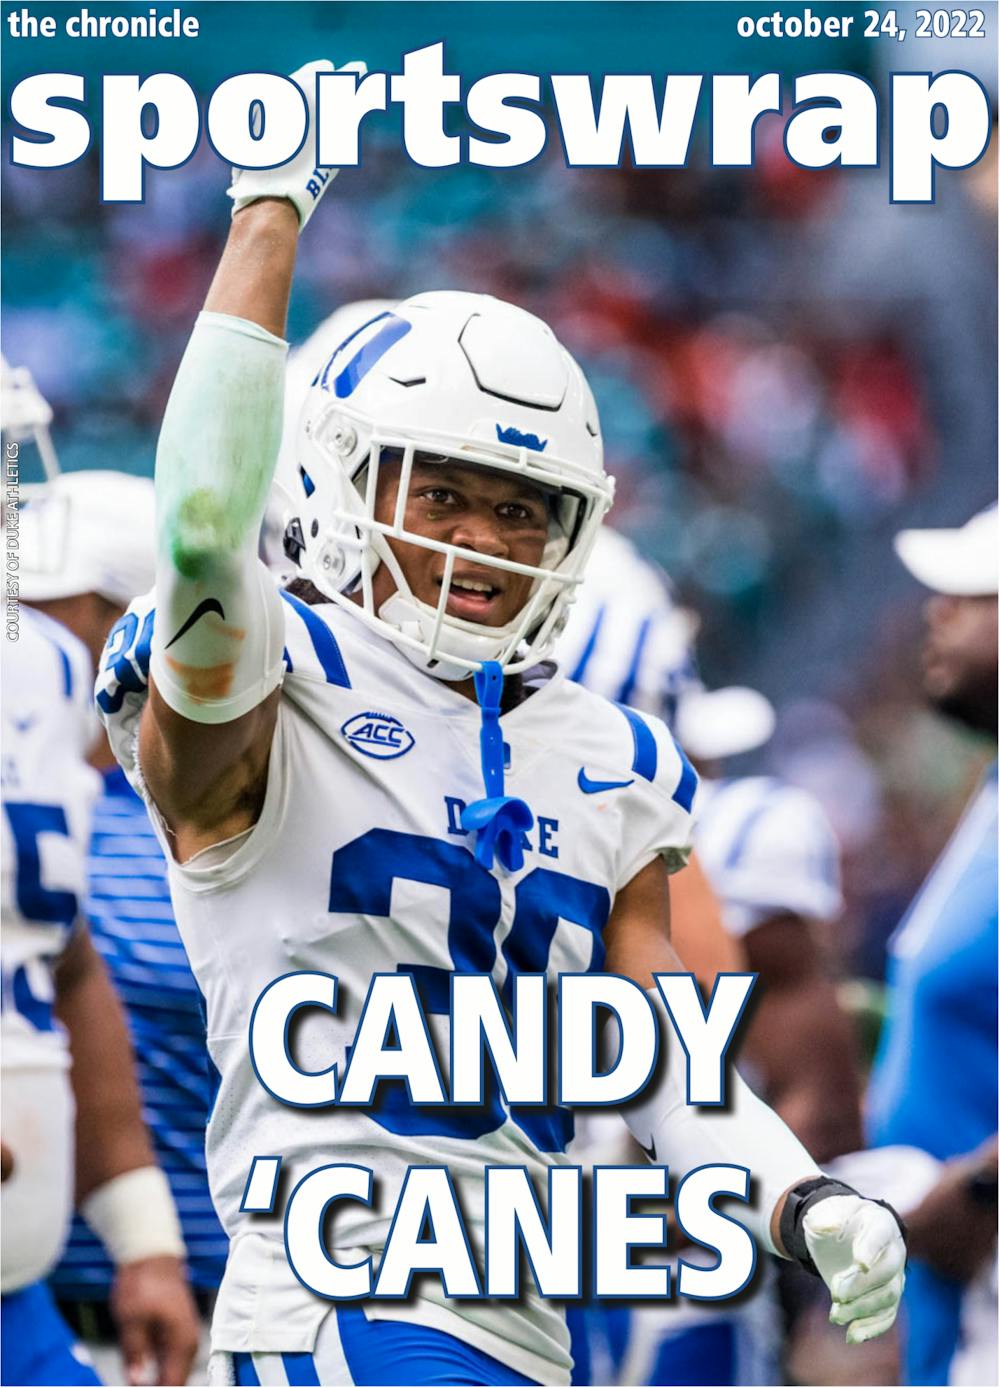 Duke football left no doubt Saturday at Miami, defeating the Hurricanes 45-21.